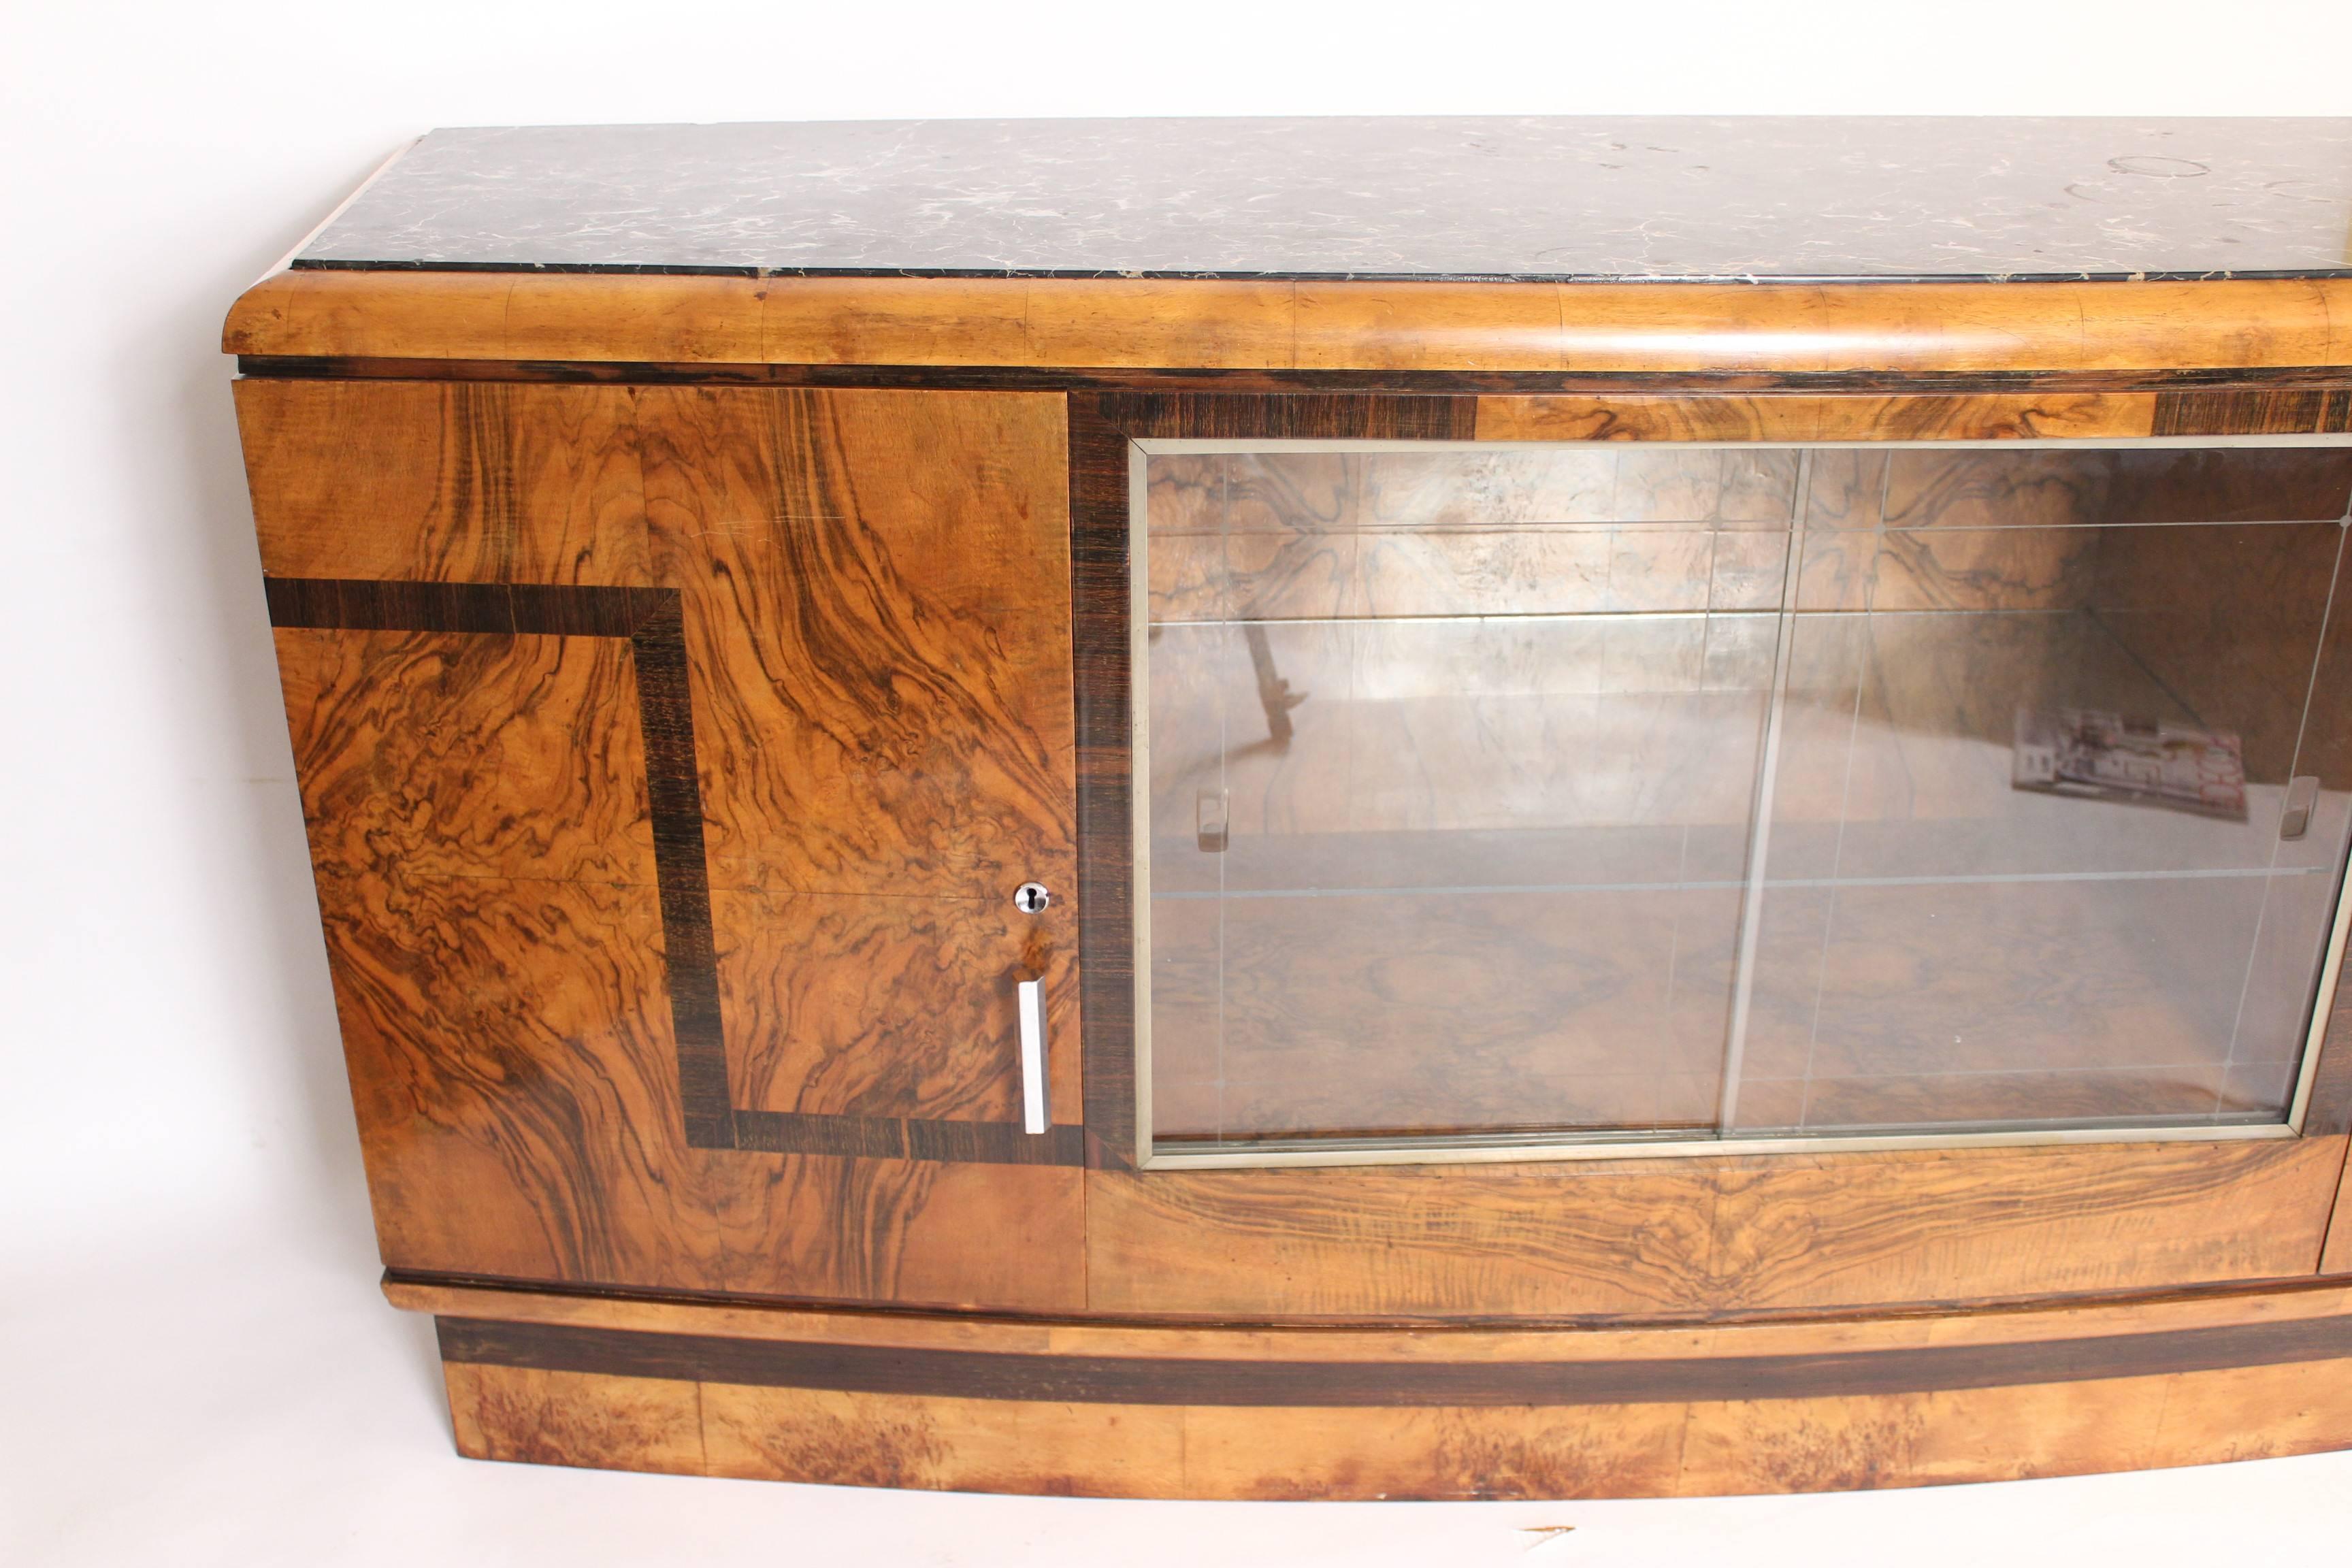 Art Deco burl walnut sideboard with sliding glass doors and a marble top, circa 1930s. This sideboard has exceptionally fine burl walnut used throughout. The top is Belgium marble. The hardware is nickel plated.